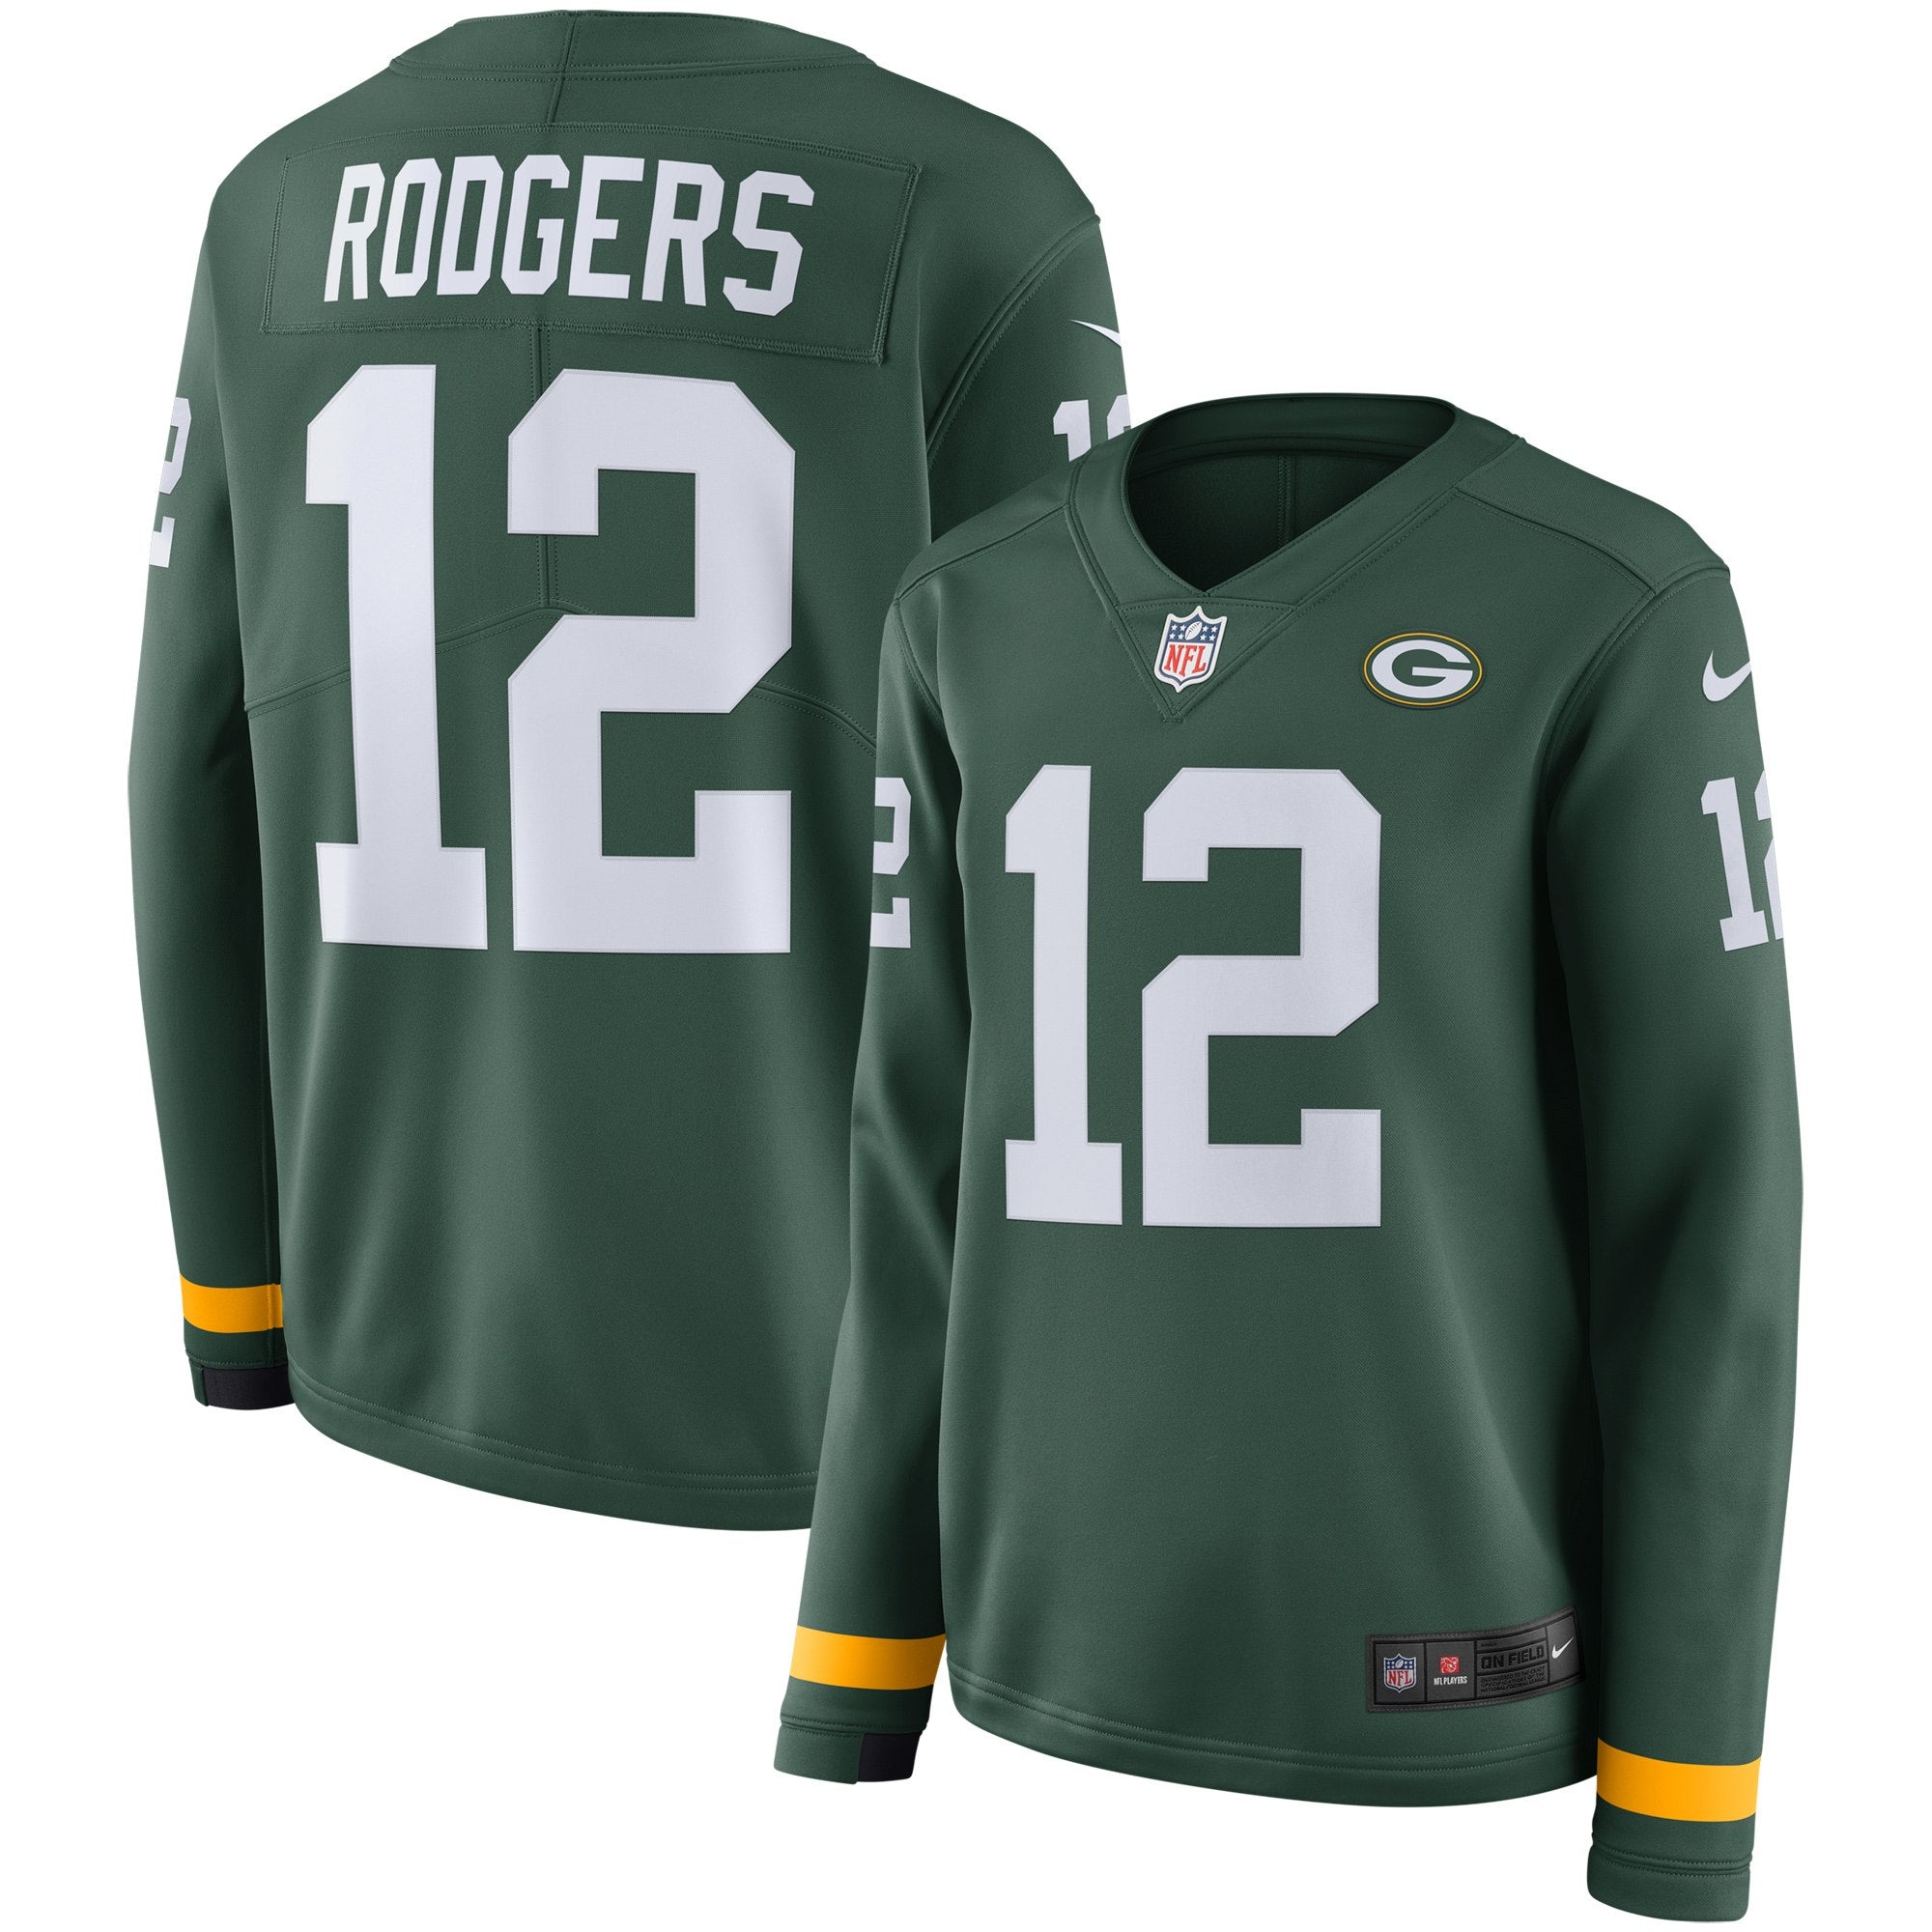 Aaron Rodgers Green Bay Packers Jersey L – Laundry